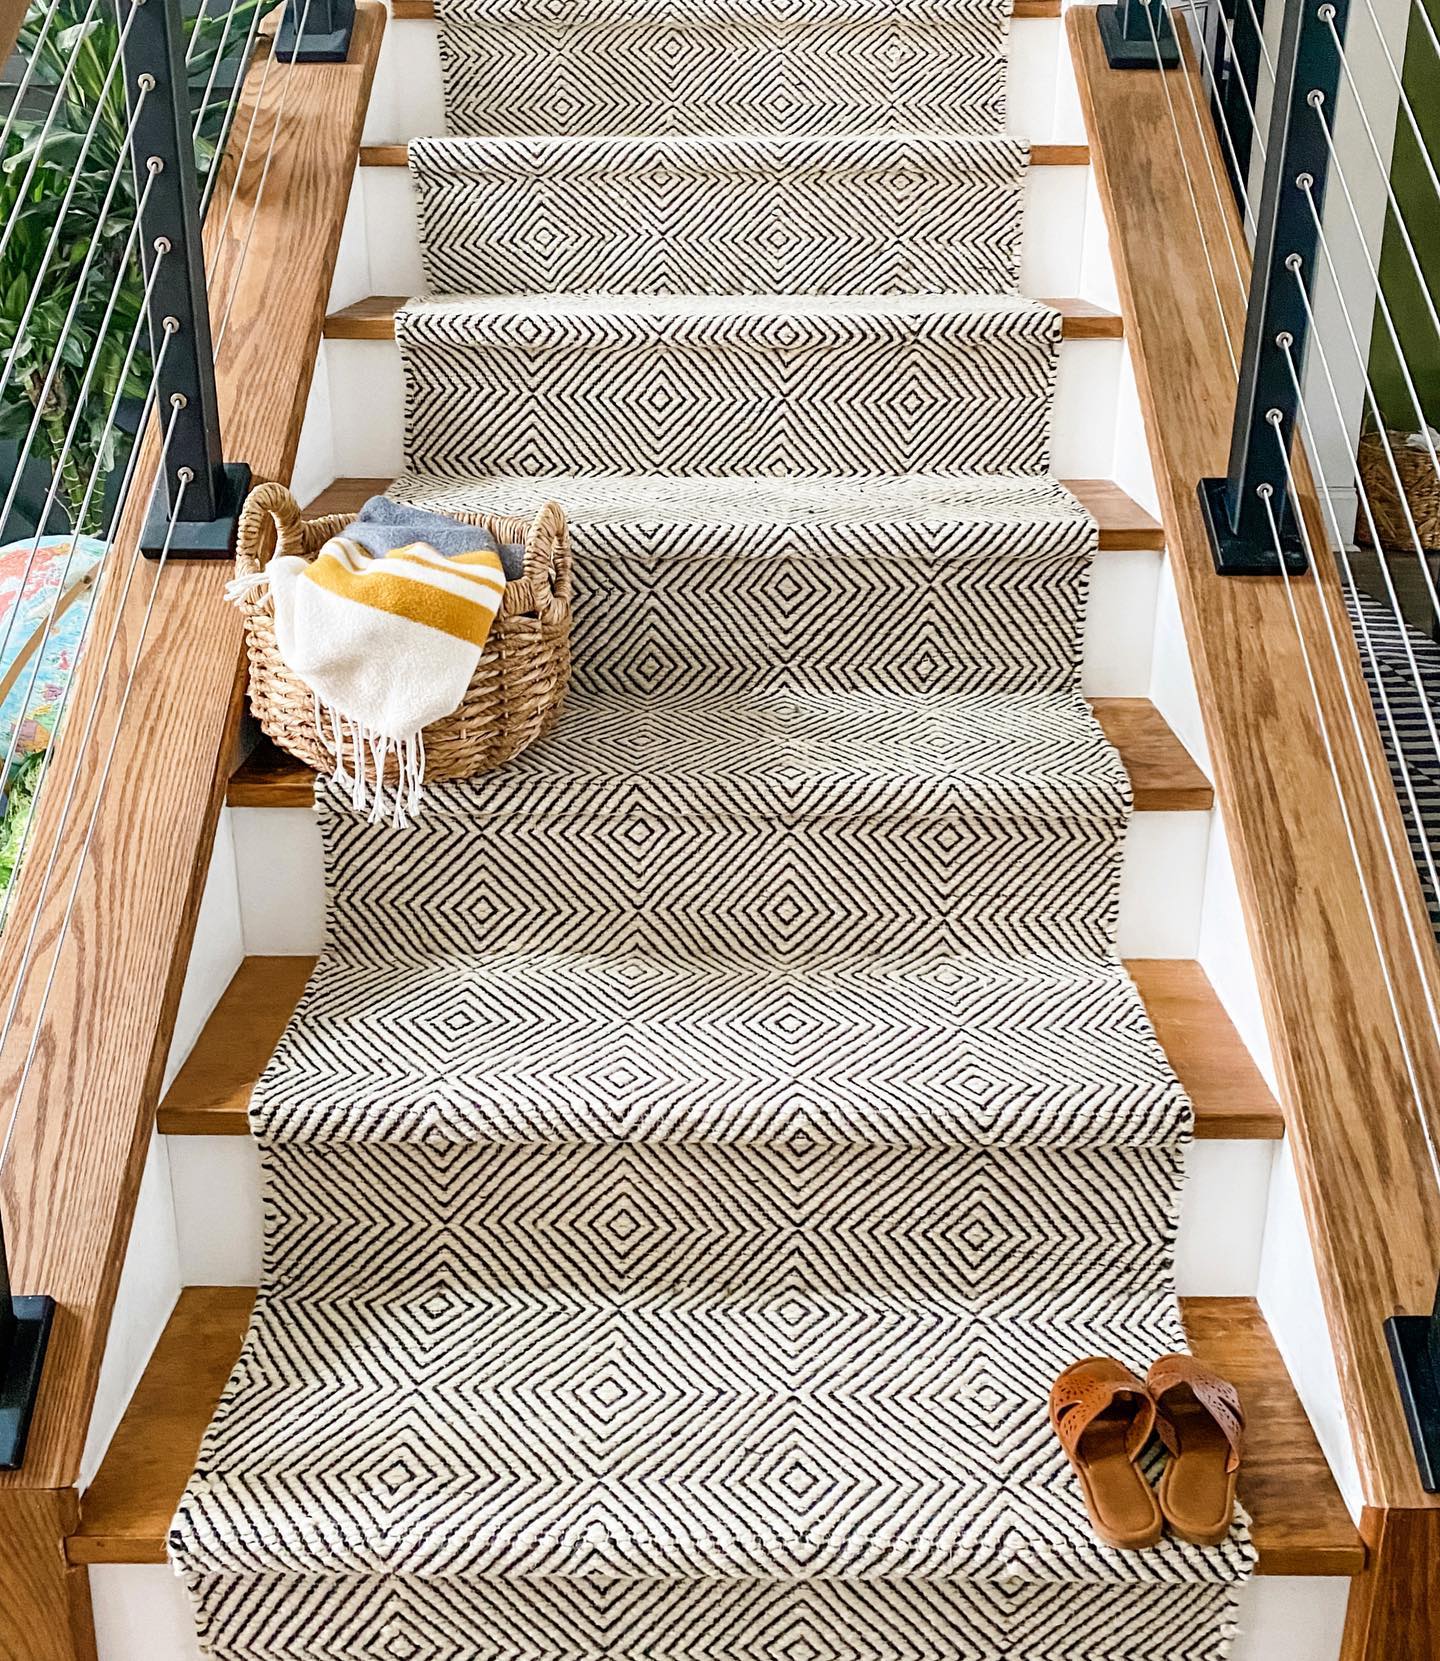 How to Take Advantage of Stairs for Different Uses?